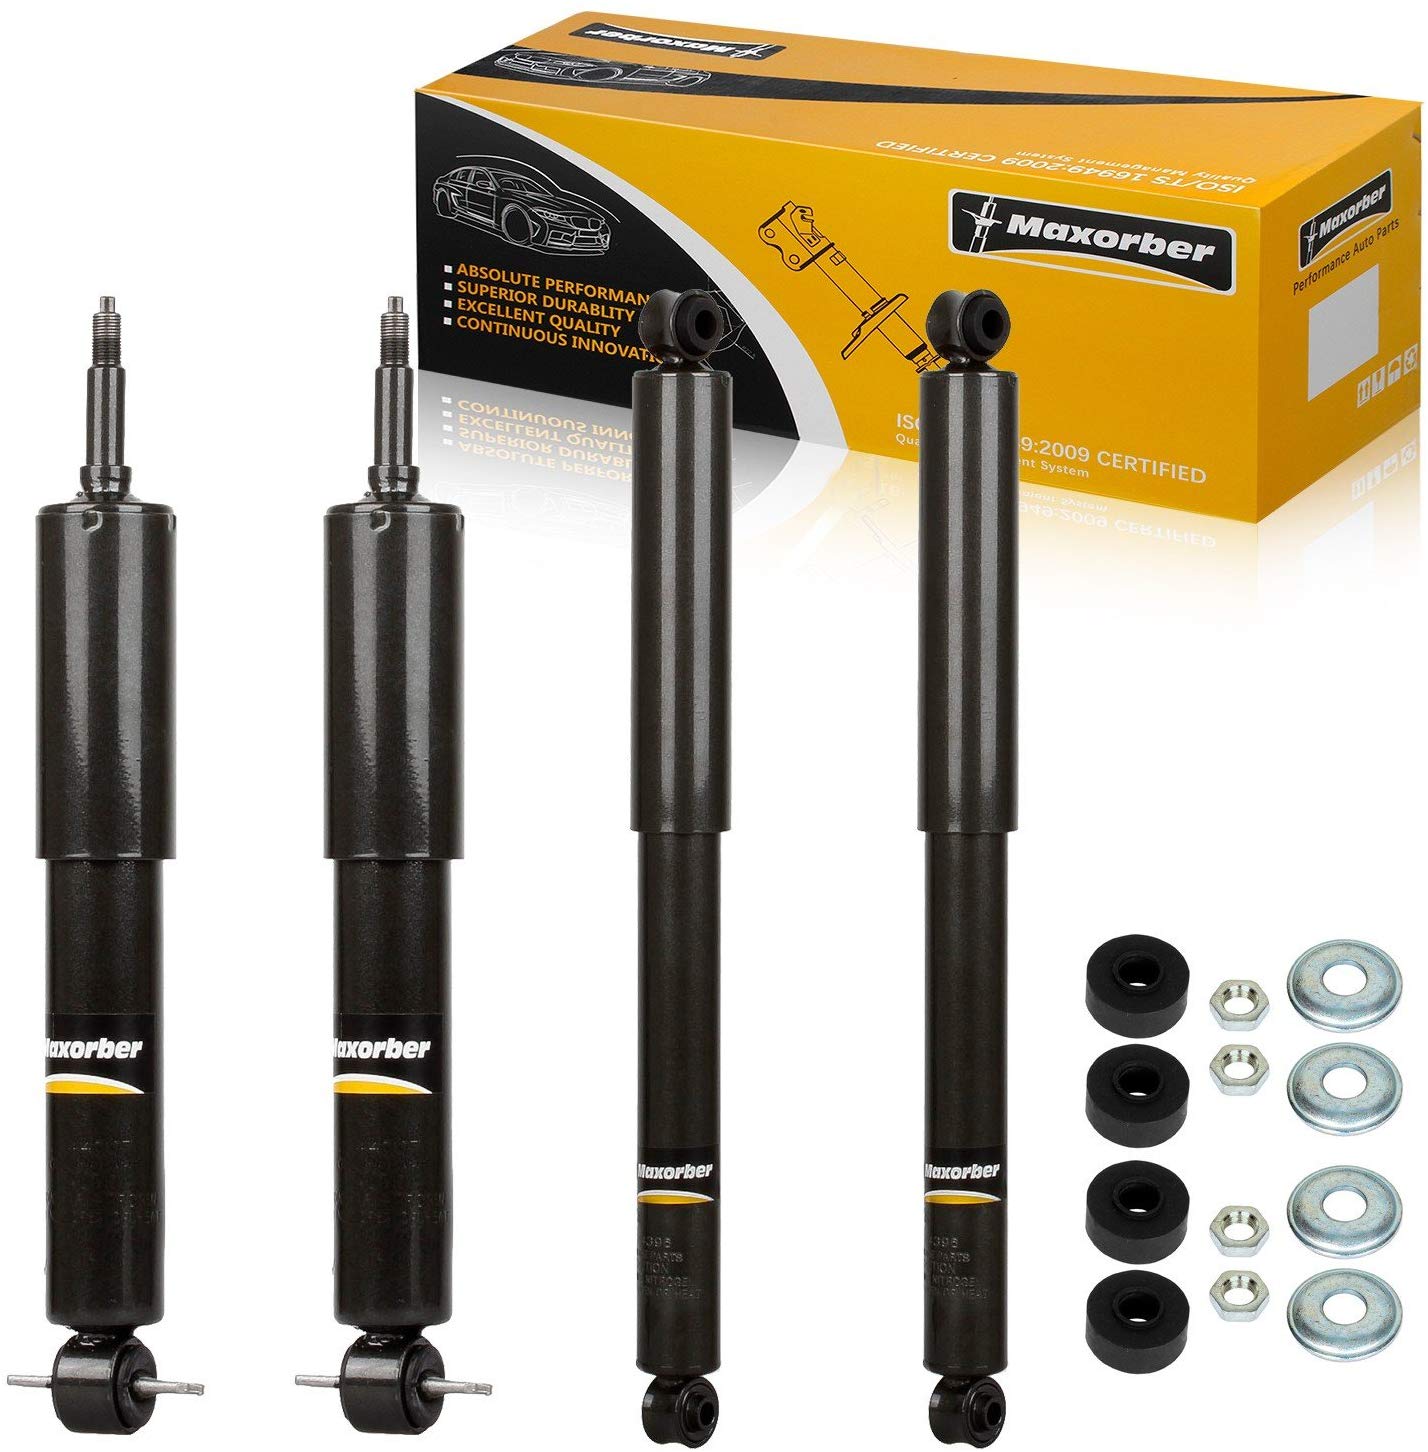 Maxorber Full Set Shocks Struts Absorber Kit Compatible with Ford Ranger RWD 98-11 Replacement for Mazda B2300 B2500 B3000 B4000 98-08 Shock Absorber 344397 344396